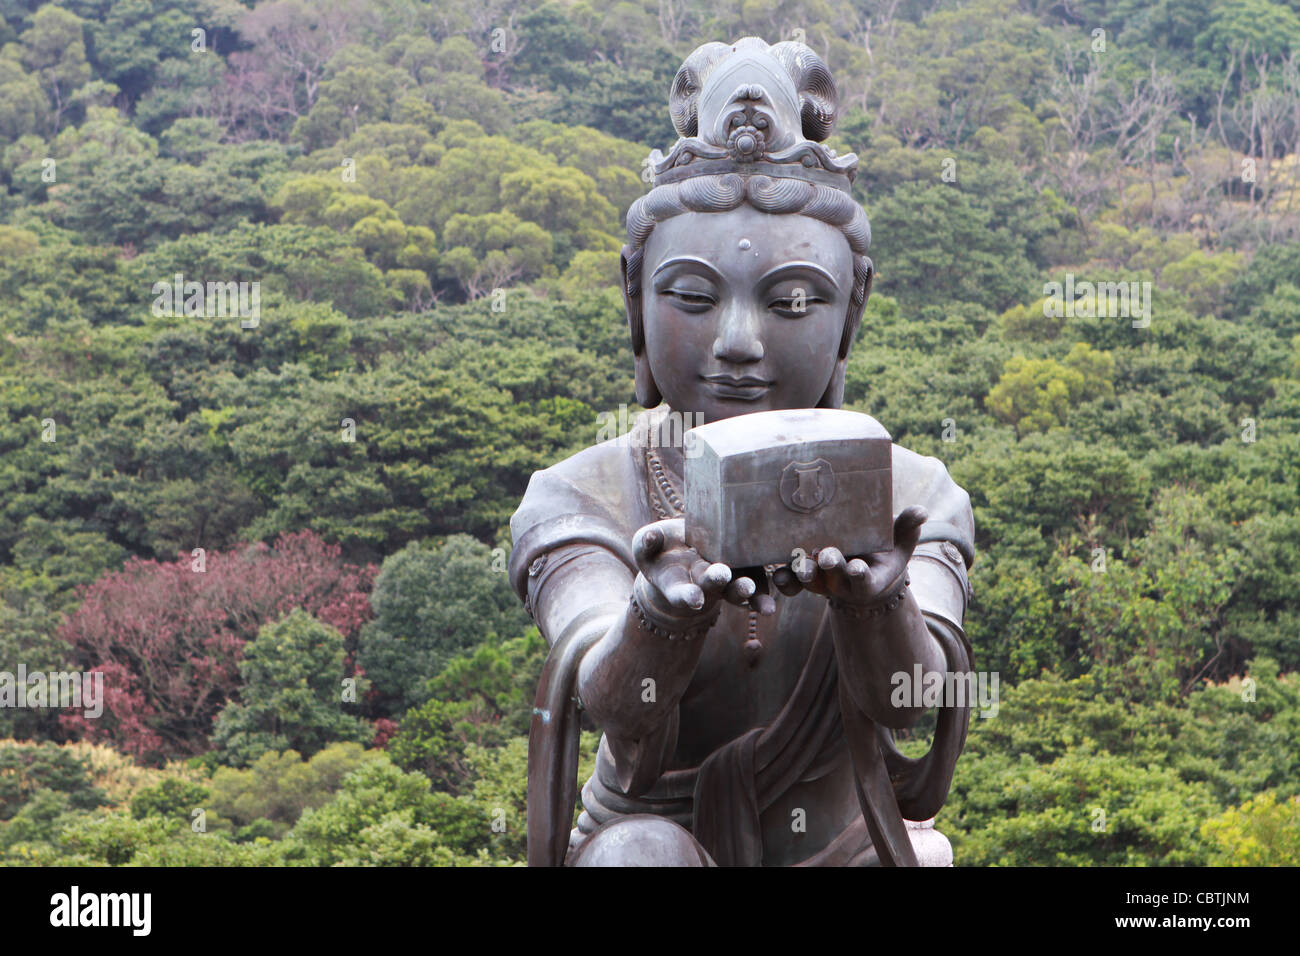 A Buddhistic statue making an offering to the Tian Tan Buddha in Hong Kong Stock Photo